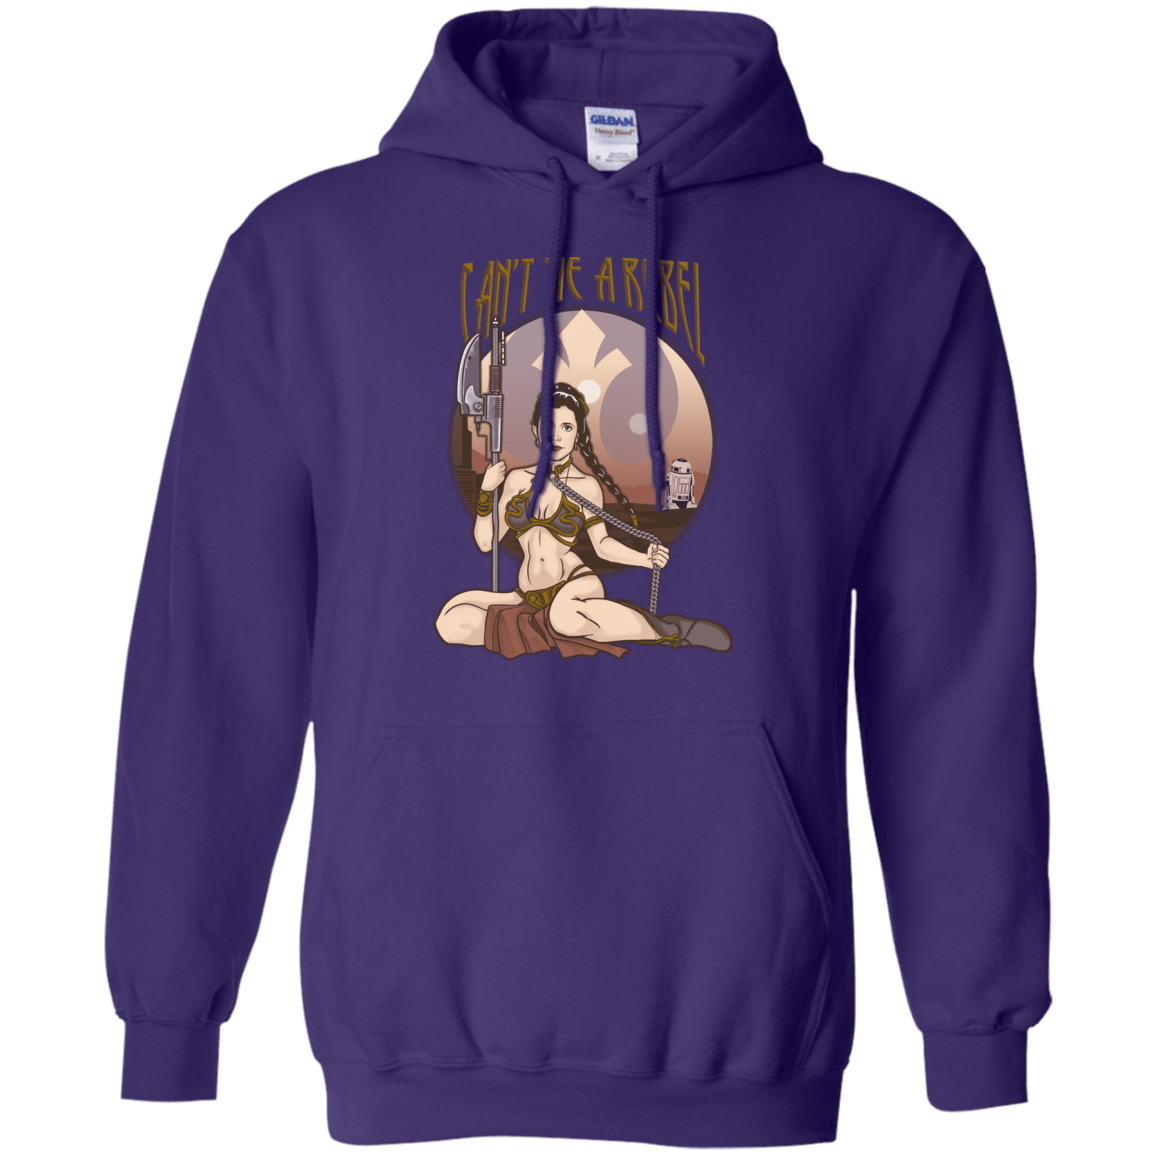 Sweatshirts Purple / Small Can't Tie a Rebel Pullover Hoodie